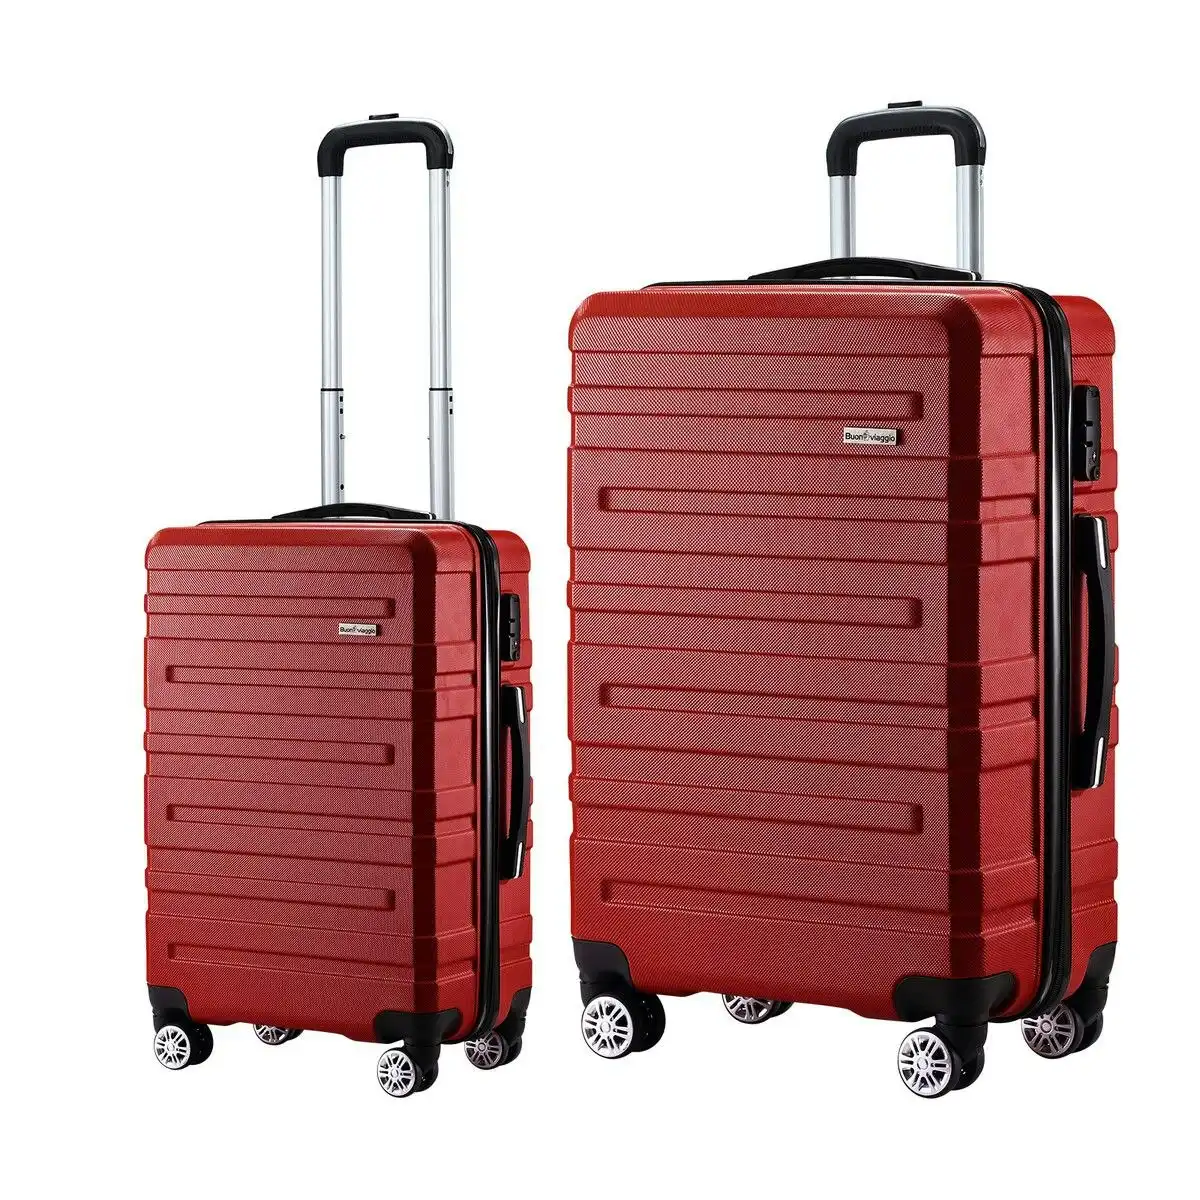 Buon Viaggio 2 Piece Luggage Set Carry On Hard Shell Suitcase Travel Trolley Expendable Lightweight Case Cabin TSA Lock Red